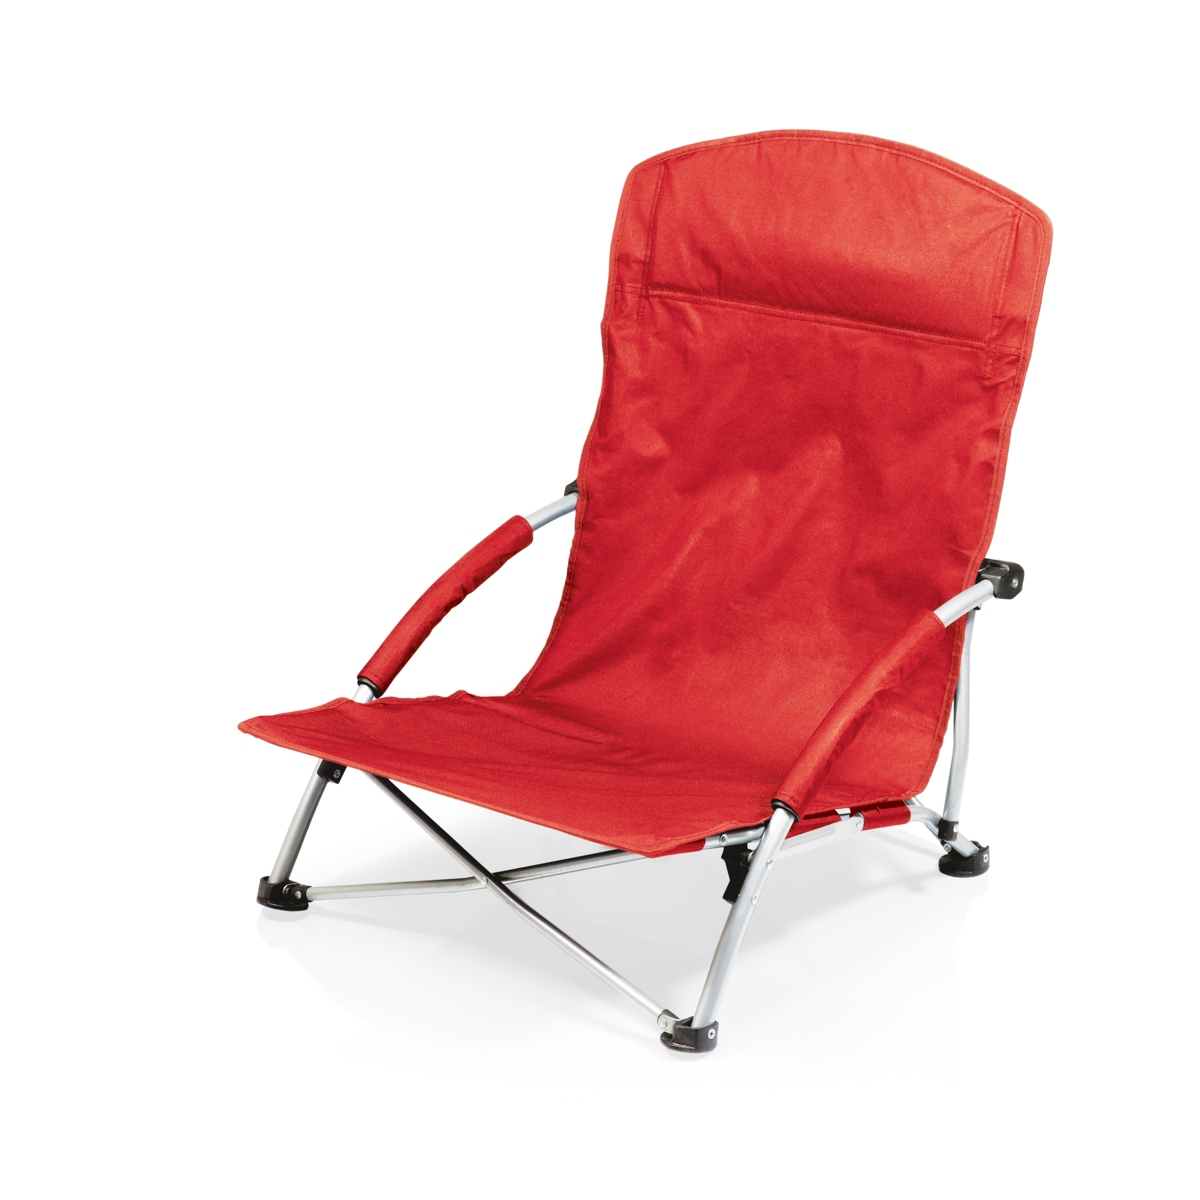 by Picnic Time Tranquility Portable Beach Chair - Red